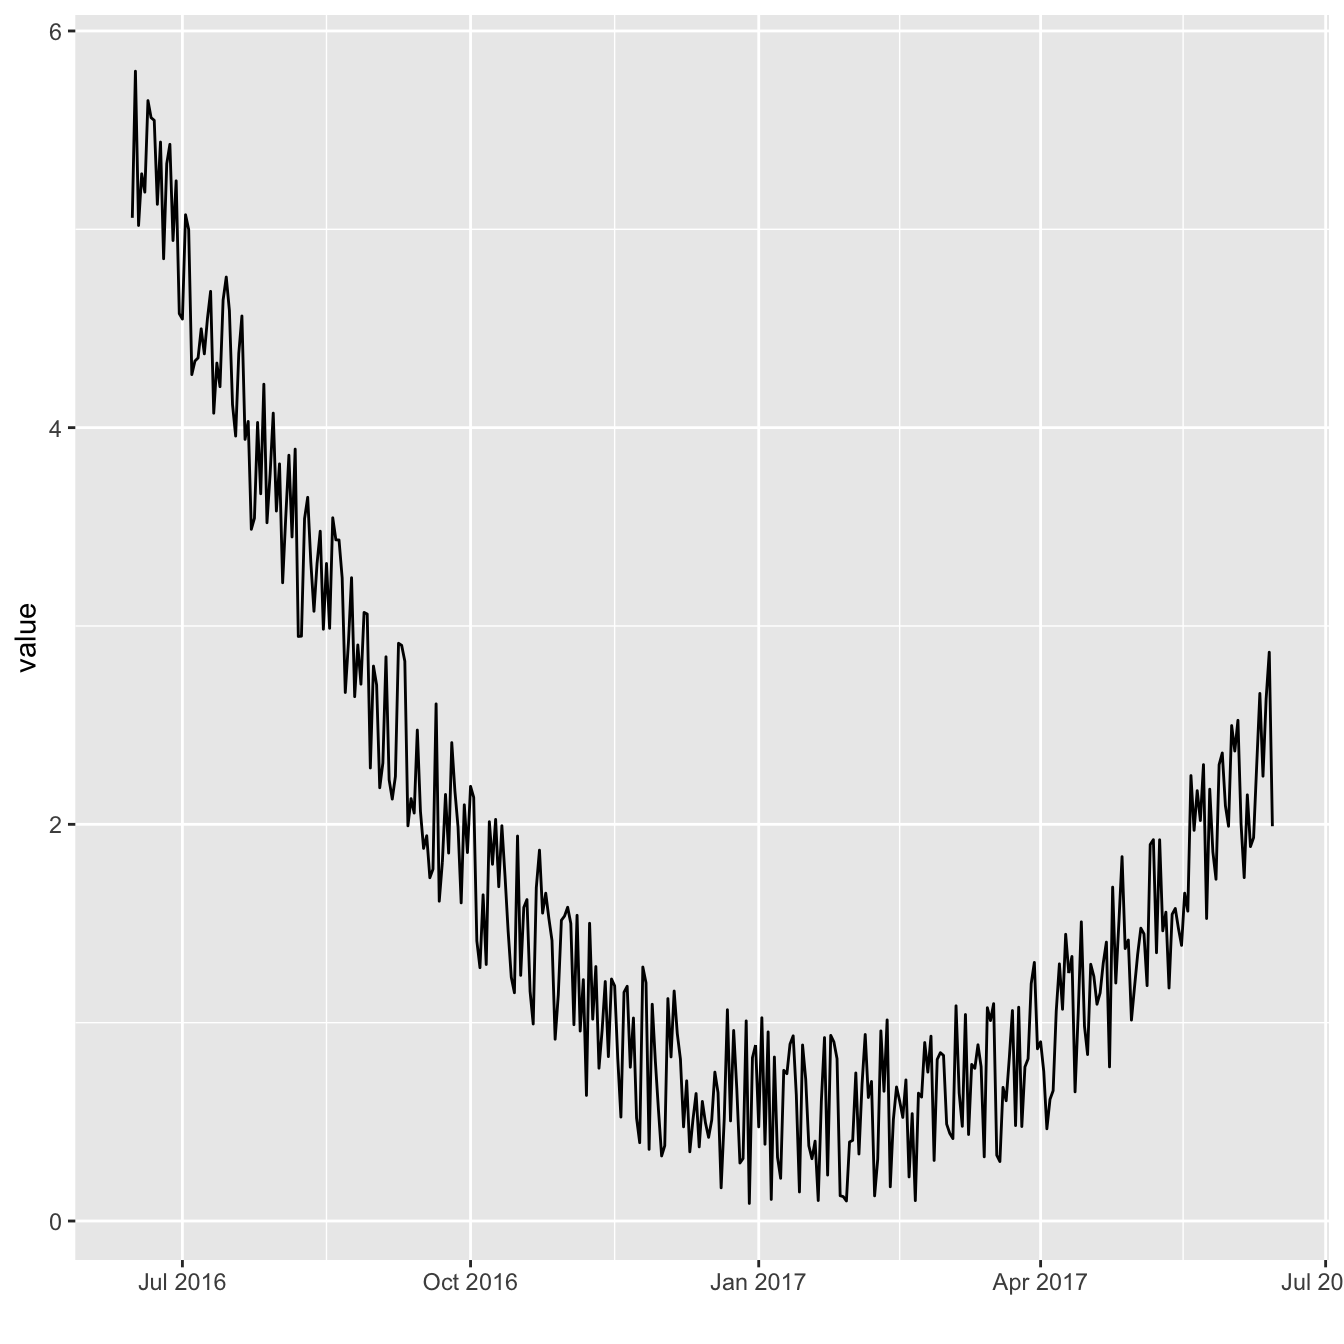 Plot of the HHGG time series (dotted line)